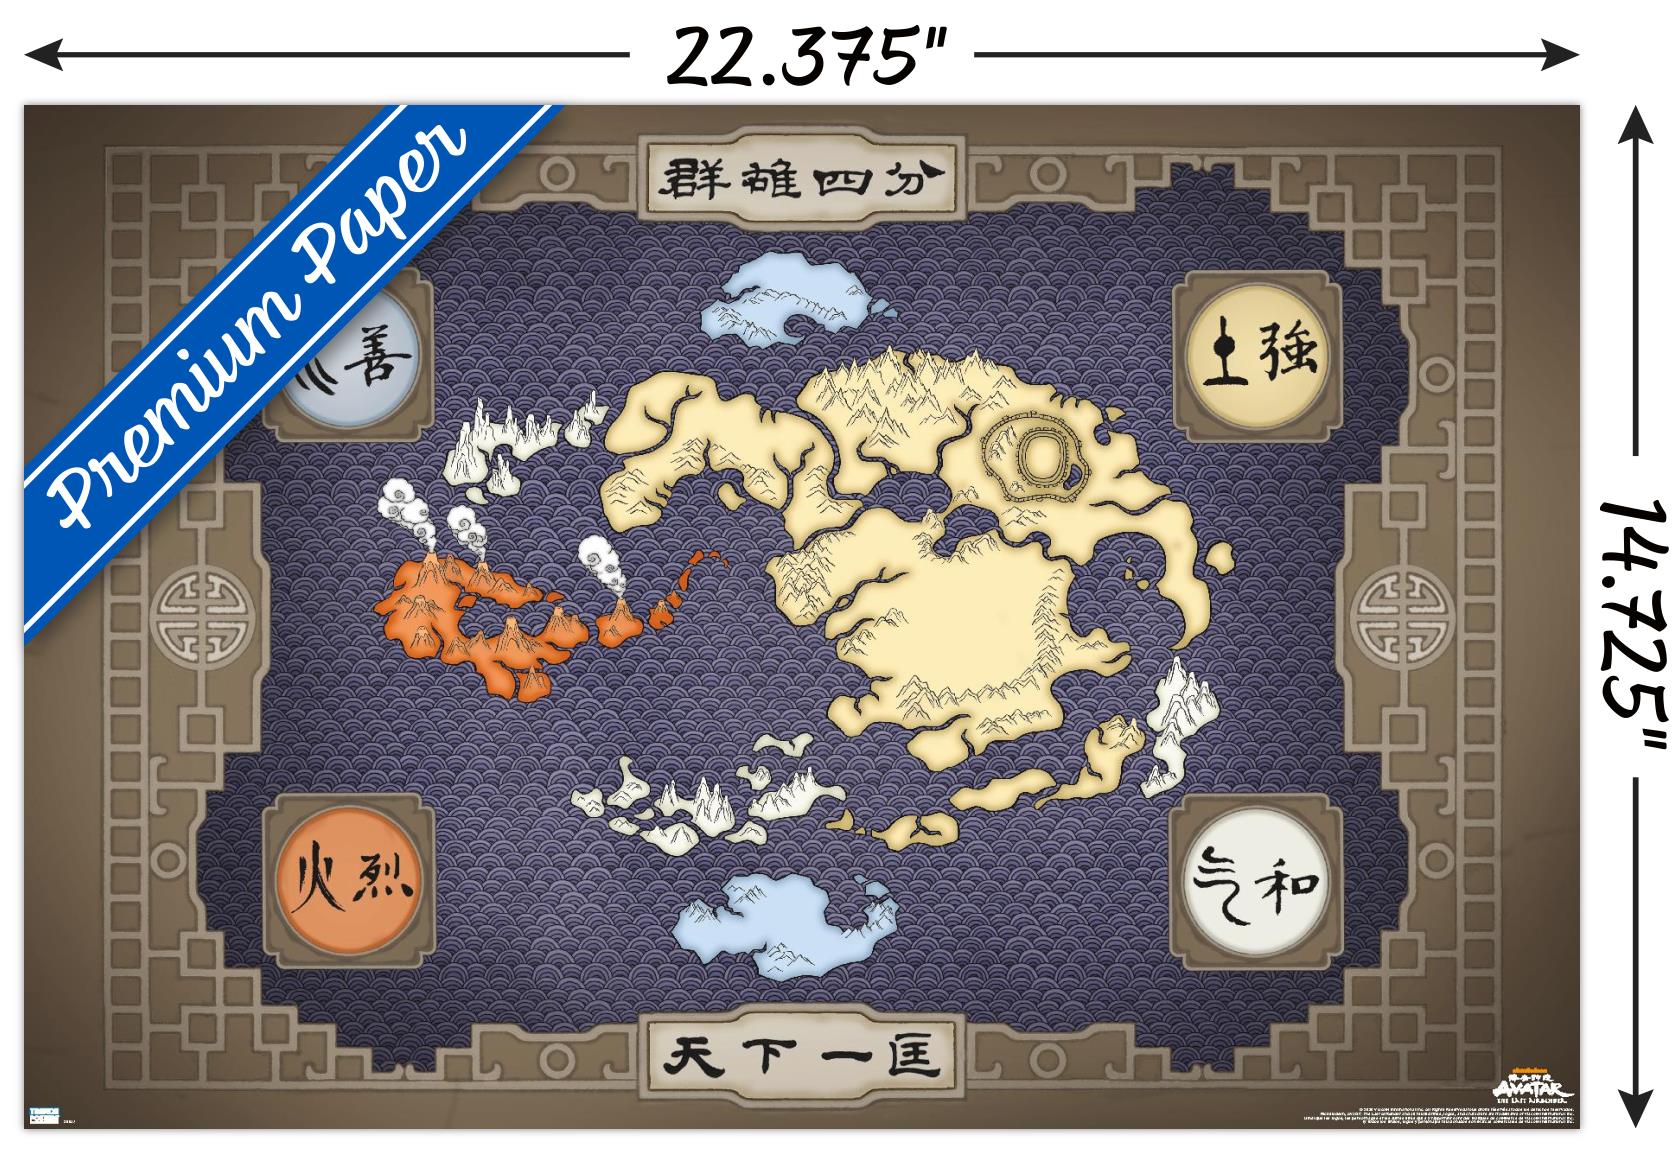 Avatar - Map Wall Poster, 14.725" x 22.375" - image 3 of 4